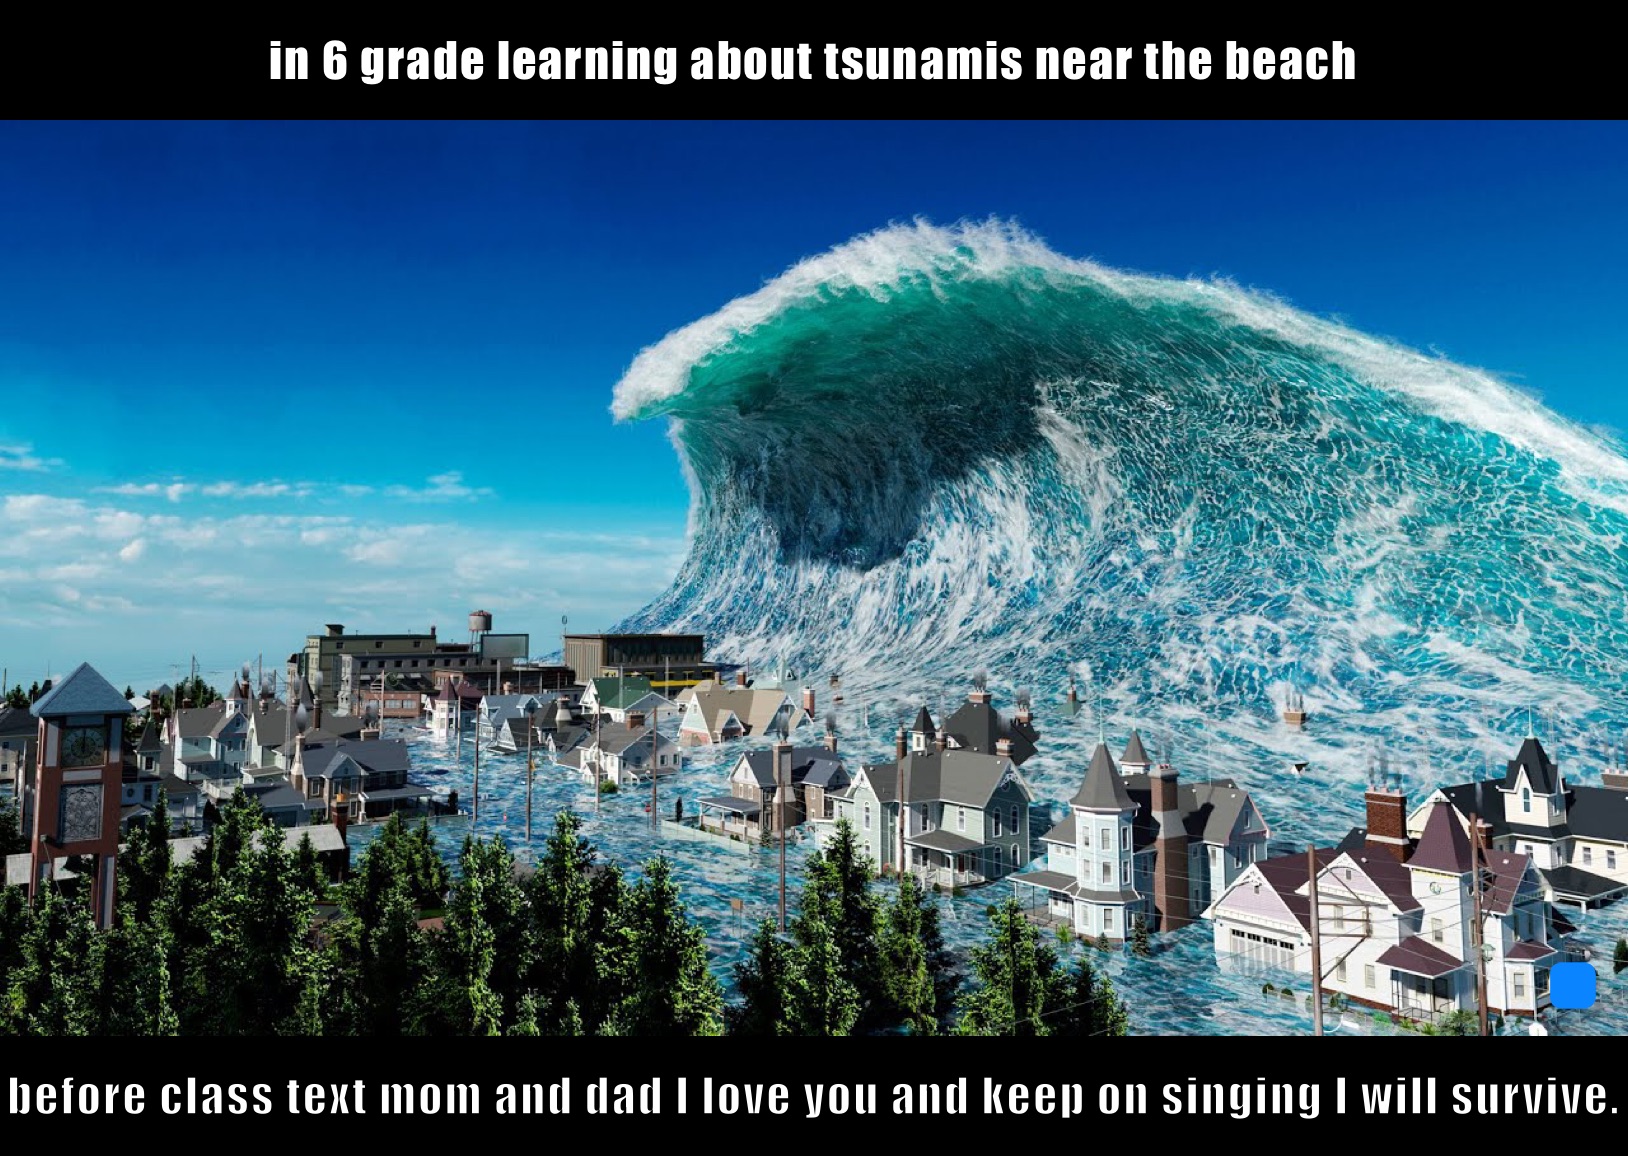 in 6 grade learning about tsunamis near the beach before class text mom and dad I love you and keep on singing I will survive.